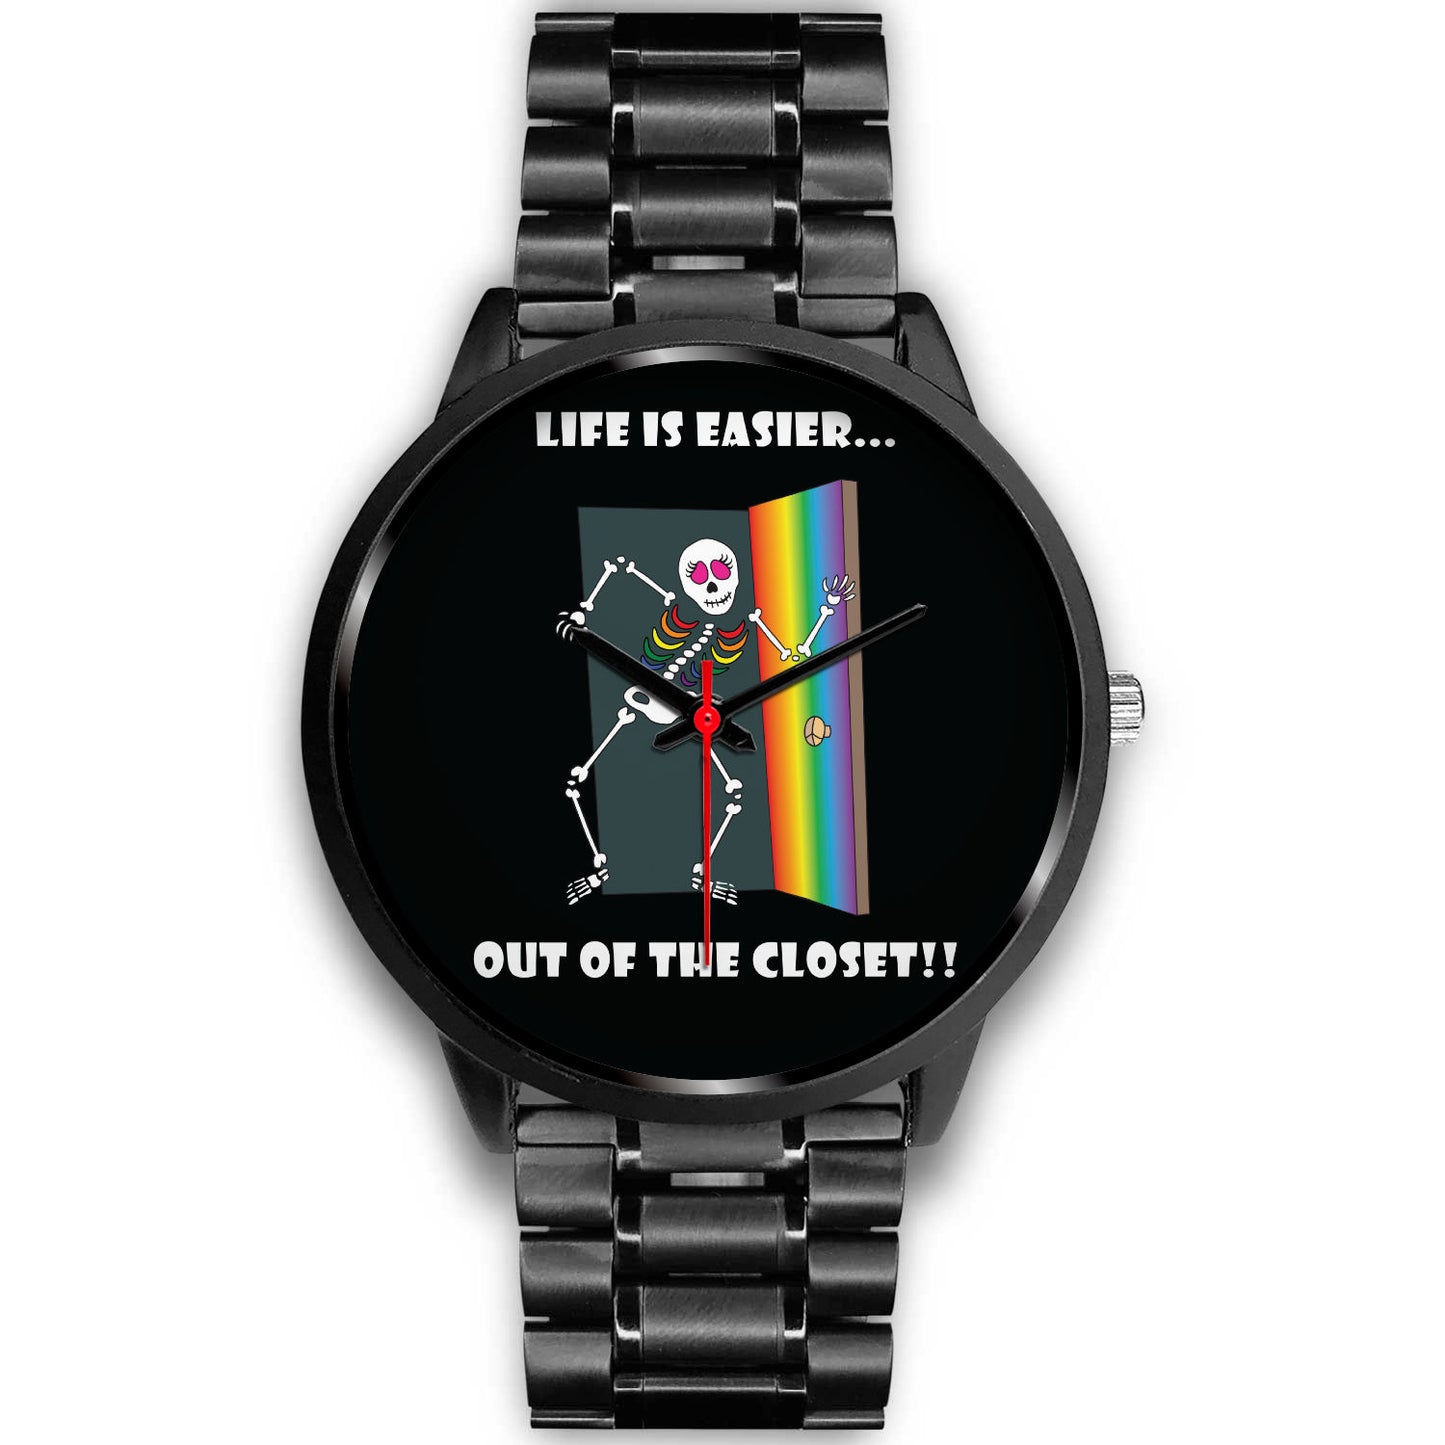 Life Is Easier Out Of The Closet Female Gender LGBT Custom Design Watch